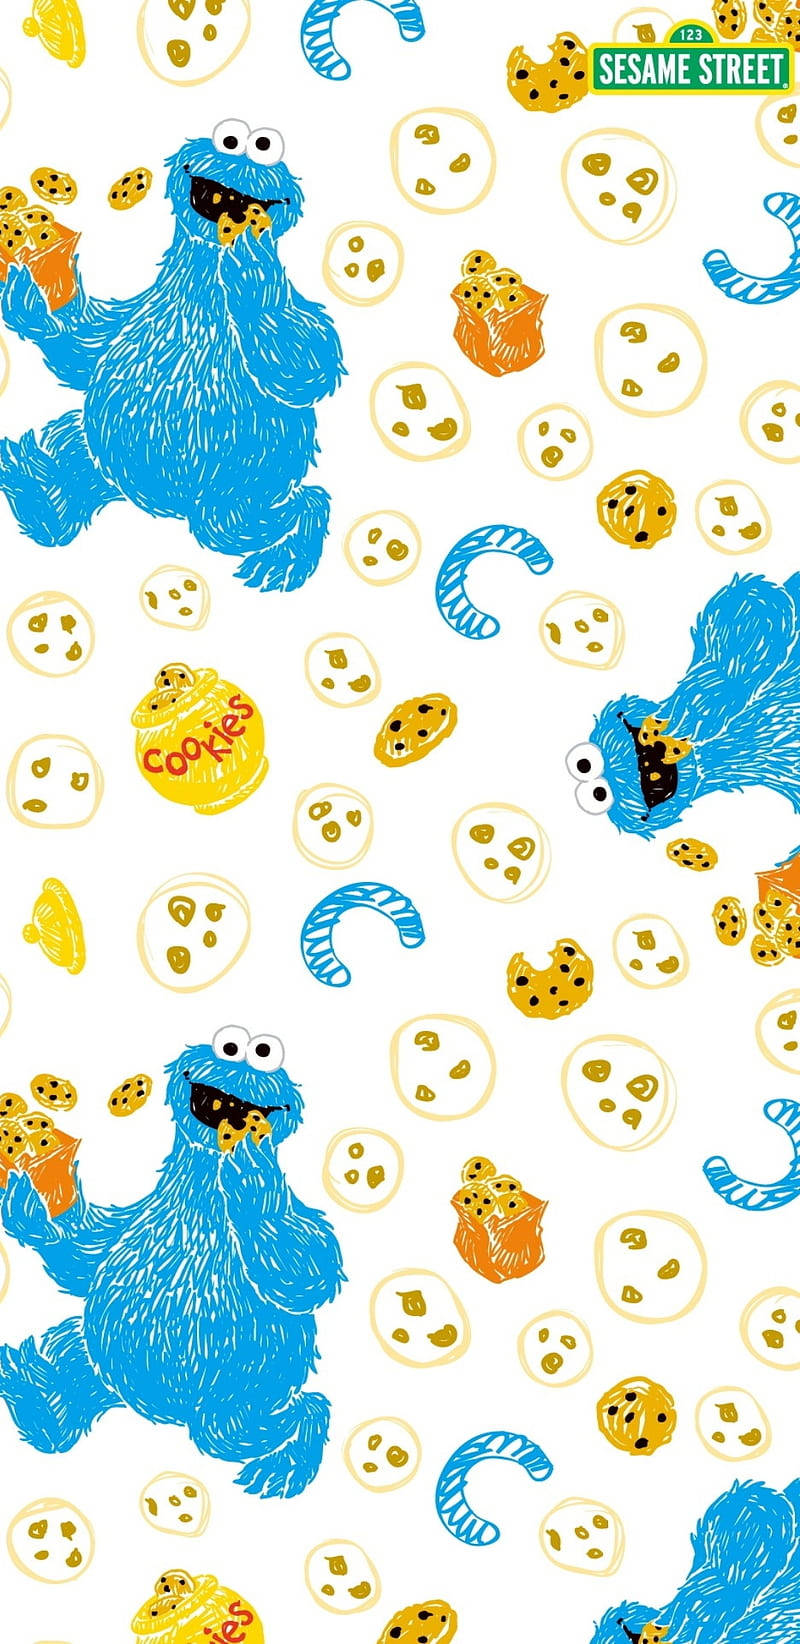 Whatsapp Chat Cookie Monster Background